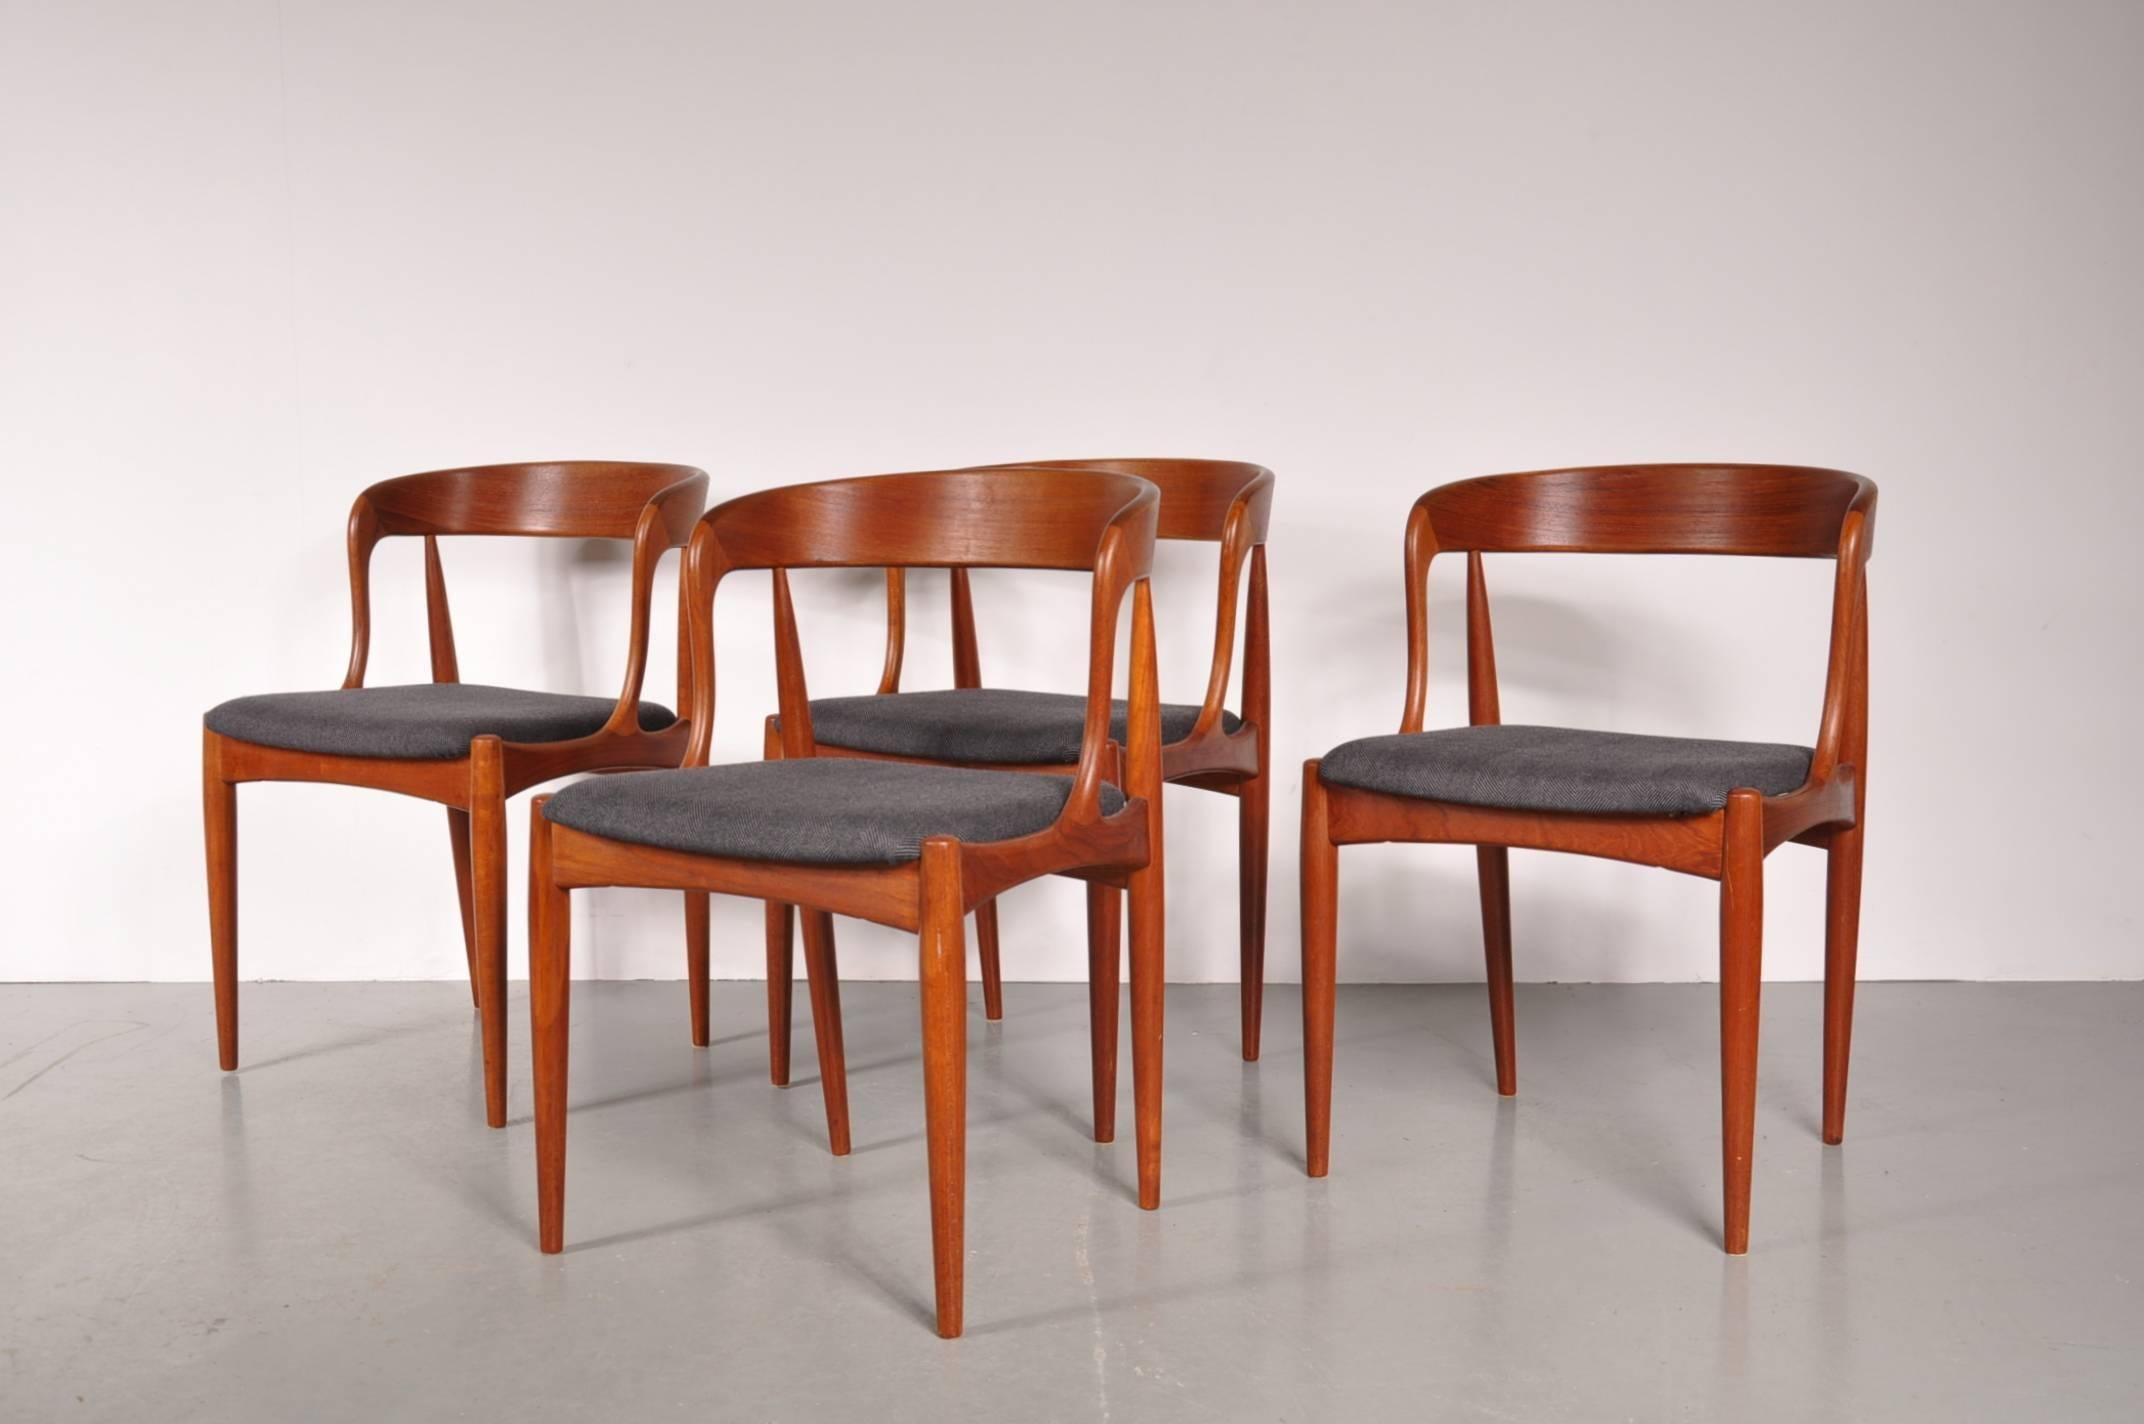 Beautiful set of four teak dining chairs by Johannes Andersen, manufactured by Uldum Mobelfabrik in Denmark around 1950.

These stunning pieces have a high quality teak base with beautiful organic shaped backrests. Together with the grey fabric